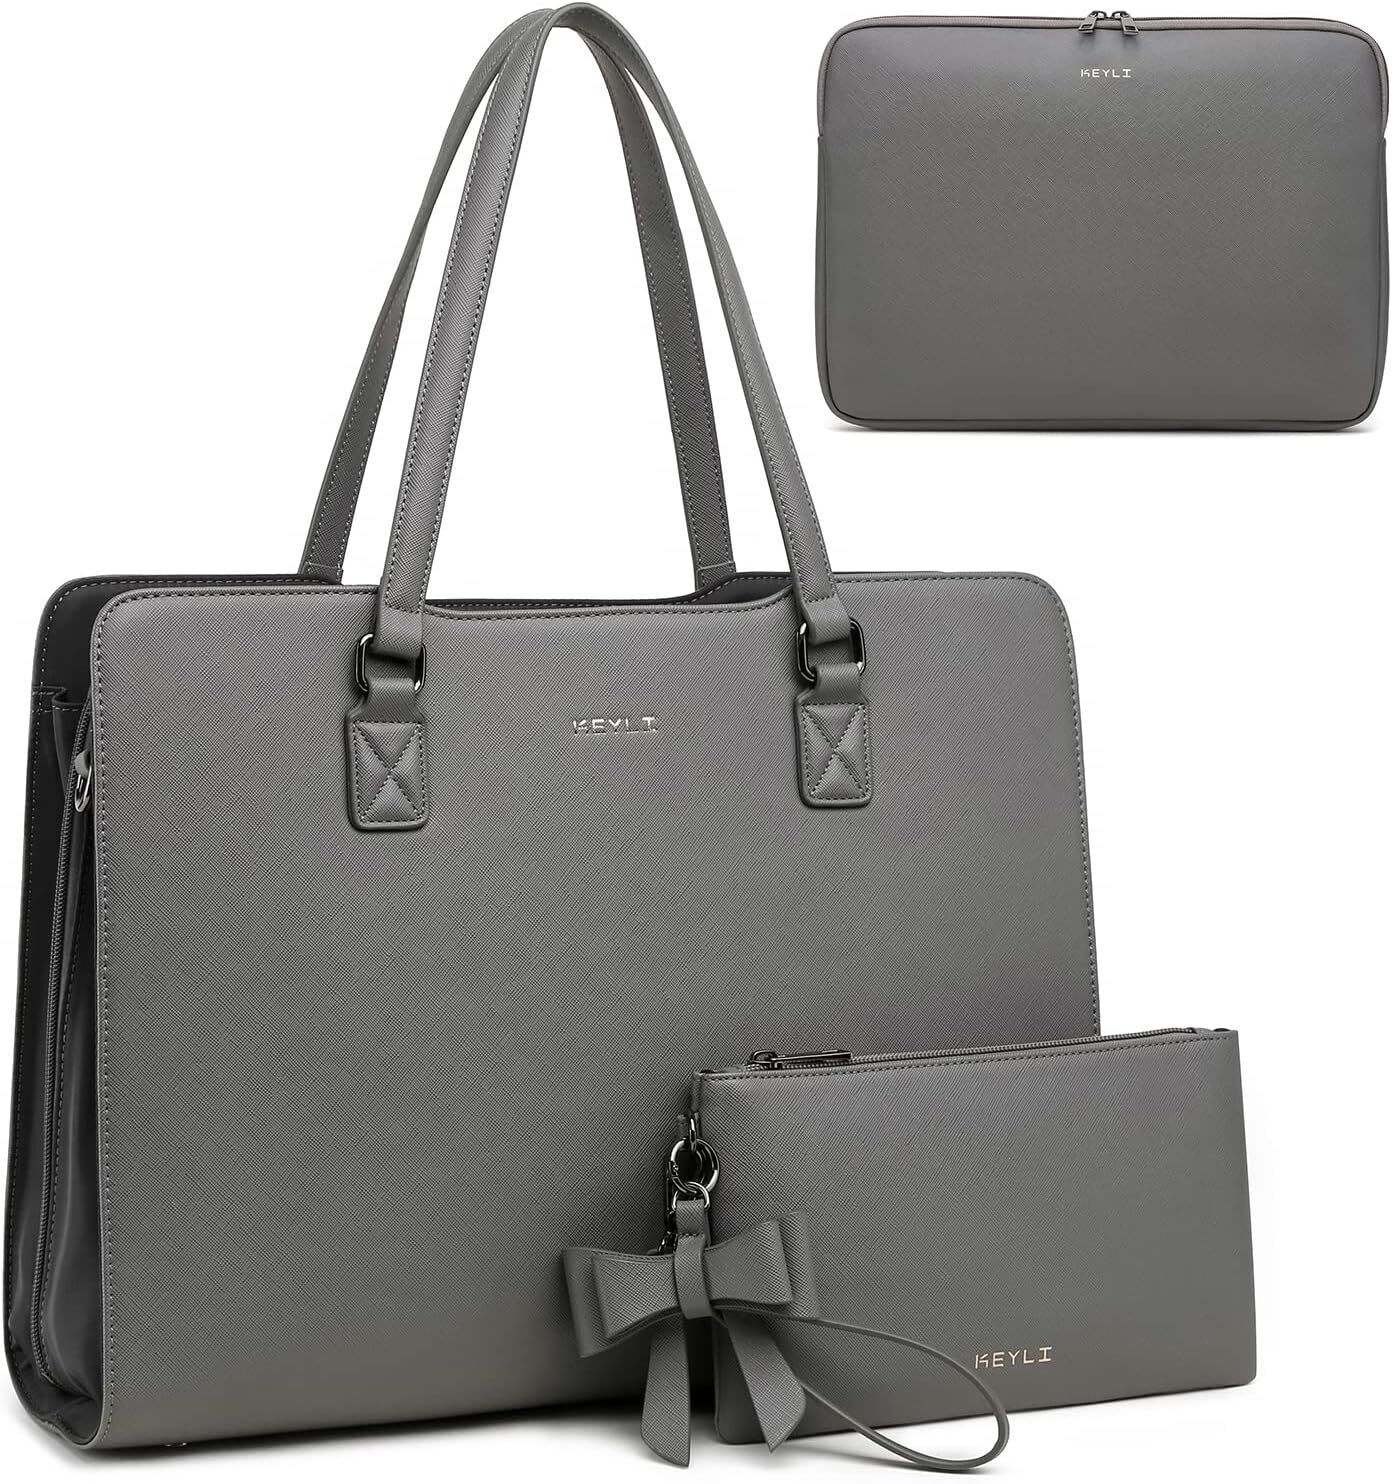 Keyli 4pc Sets Laptop Bag for Women Large Leather Briefcase Grey_2 